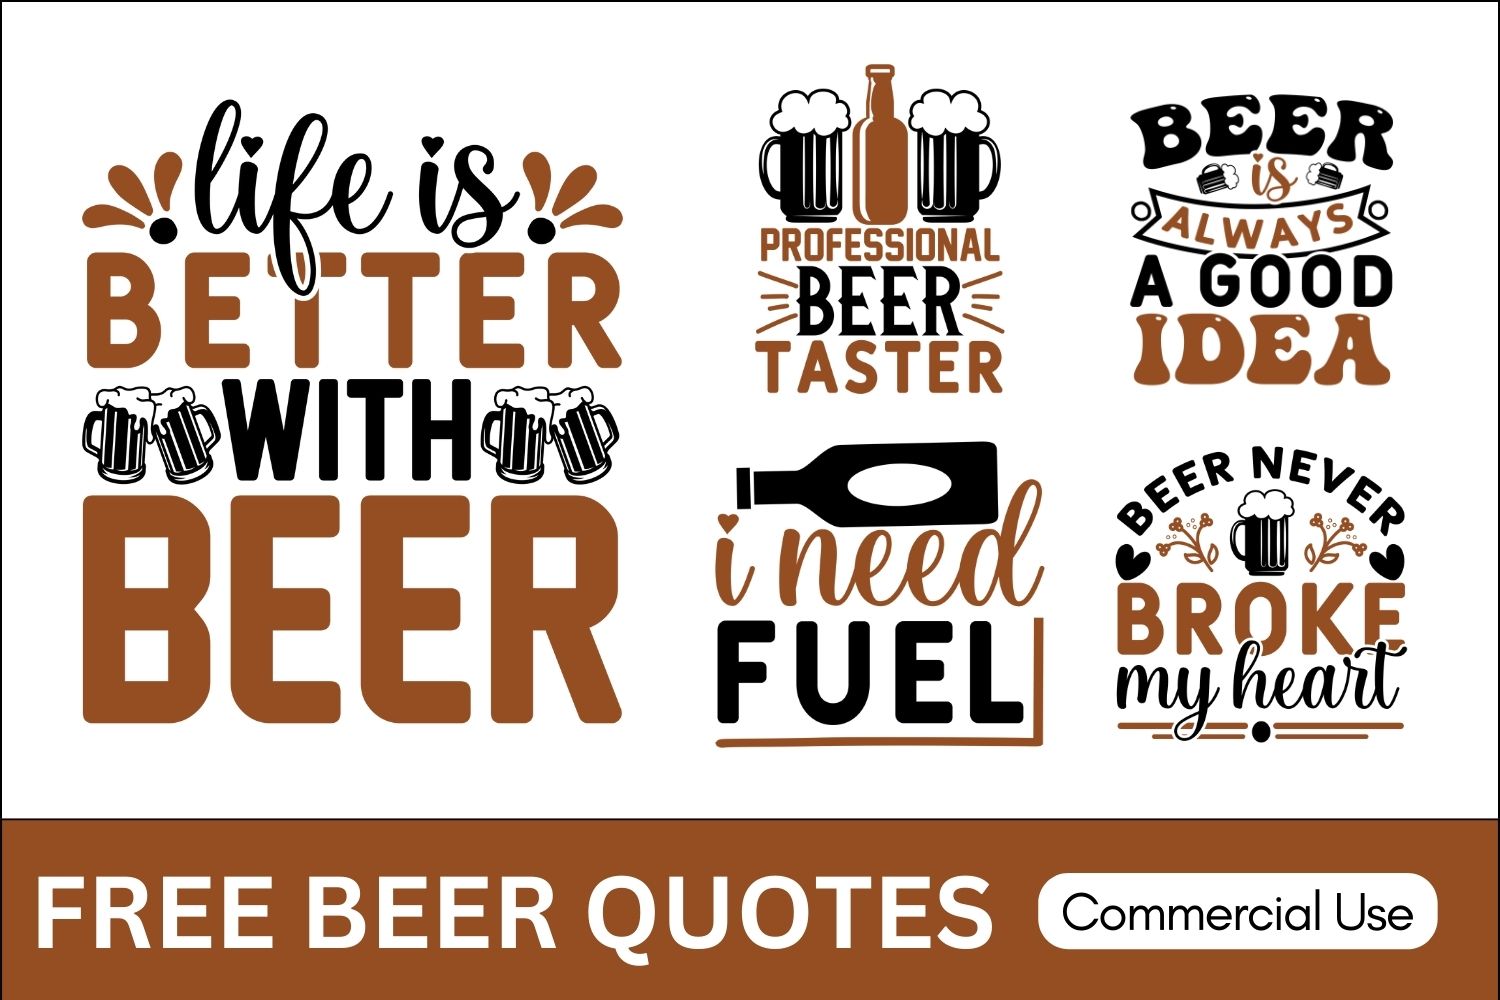 beer quotes, beer sayings, Cricut designs, free, clip art, svg file, template, pattern, stencil, silhouette, cut file, design space, vector, shirt, cup, DIY crafts and projects, embroidery.